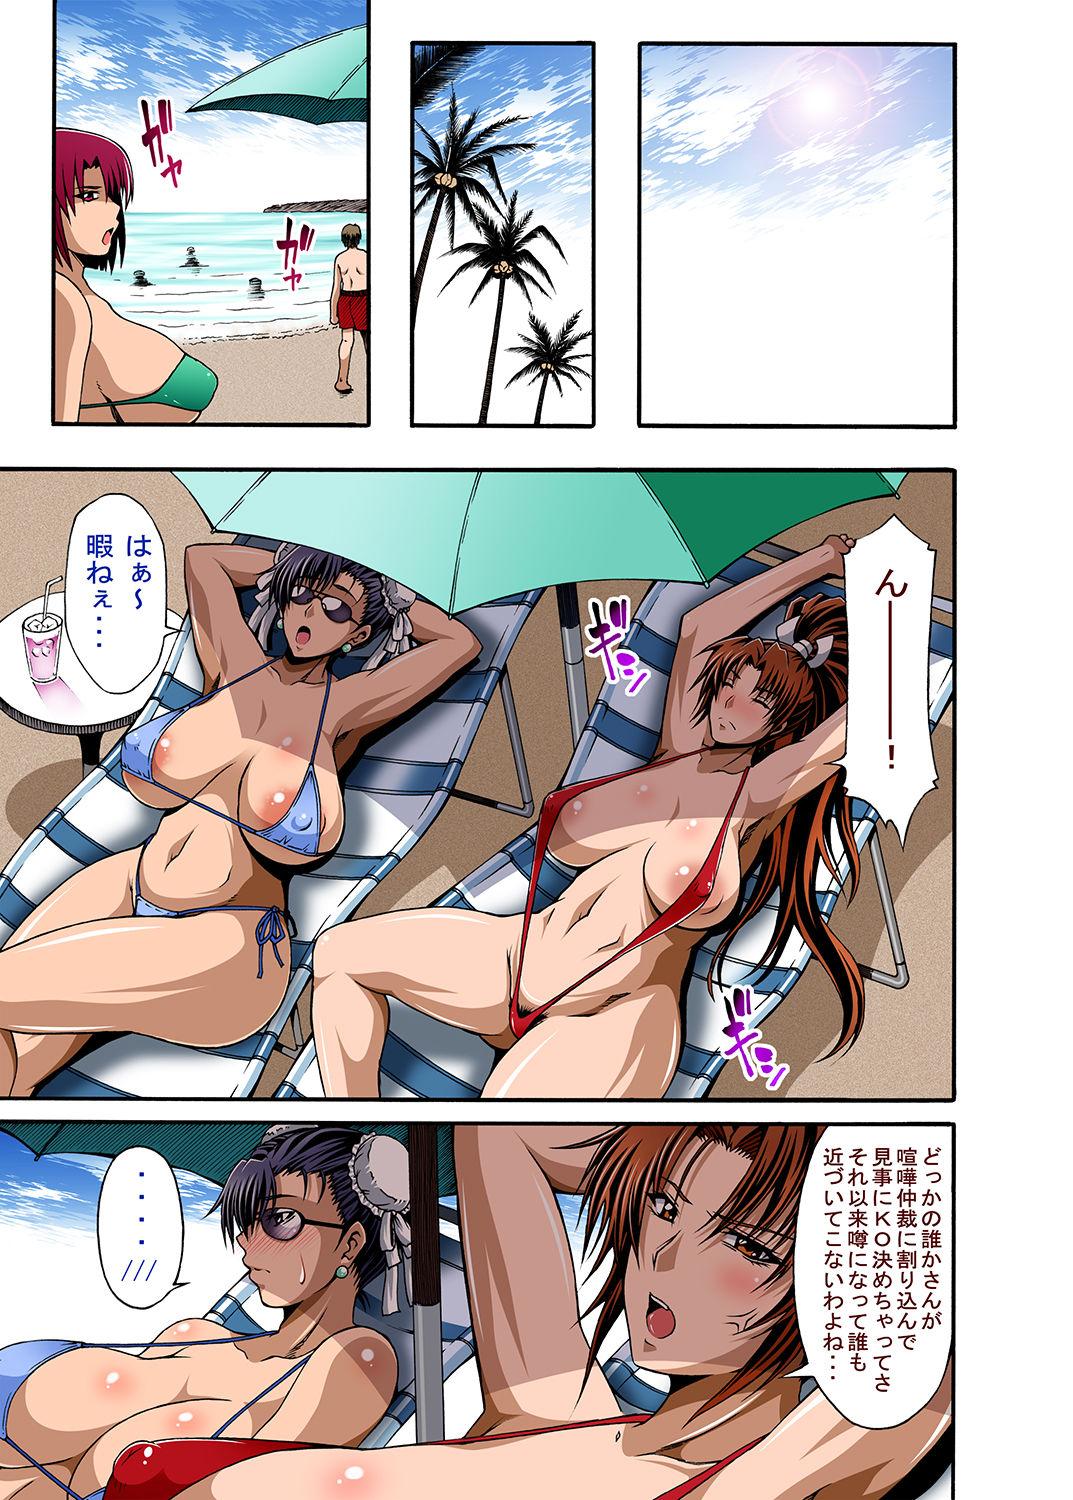 Leche Nipponichi Choroi Onna to Masegaki - Street fighter King of fighters Eating Pussy - Page 3